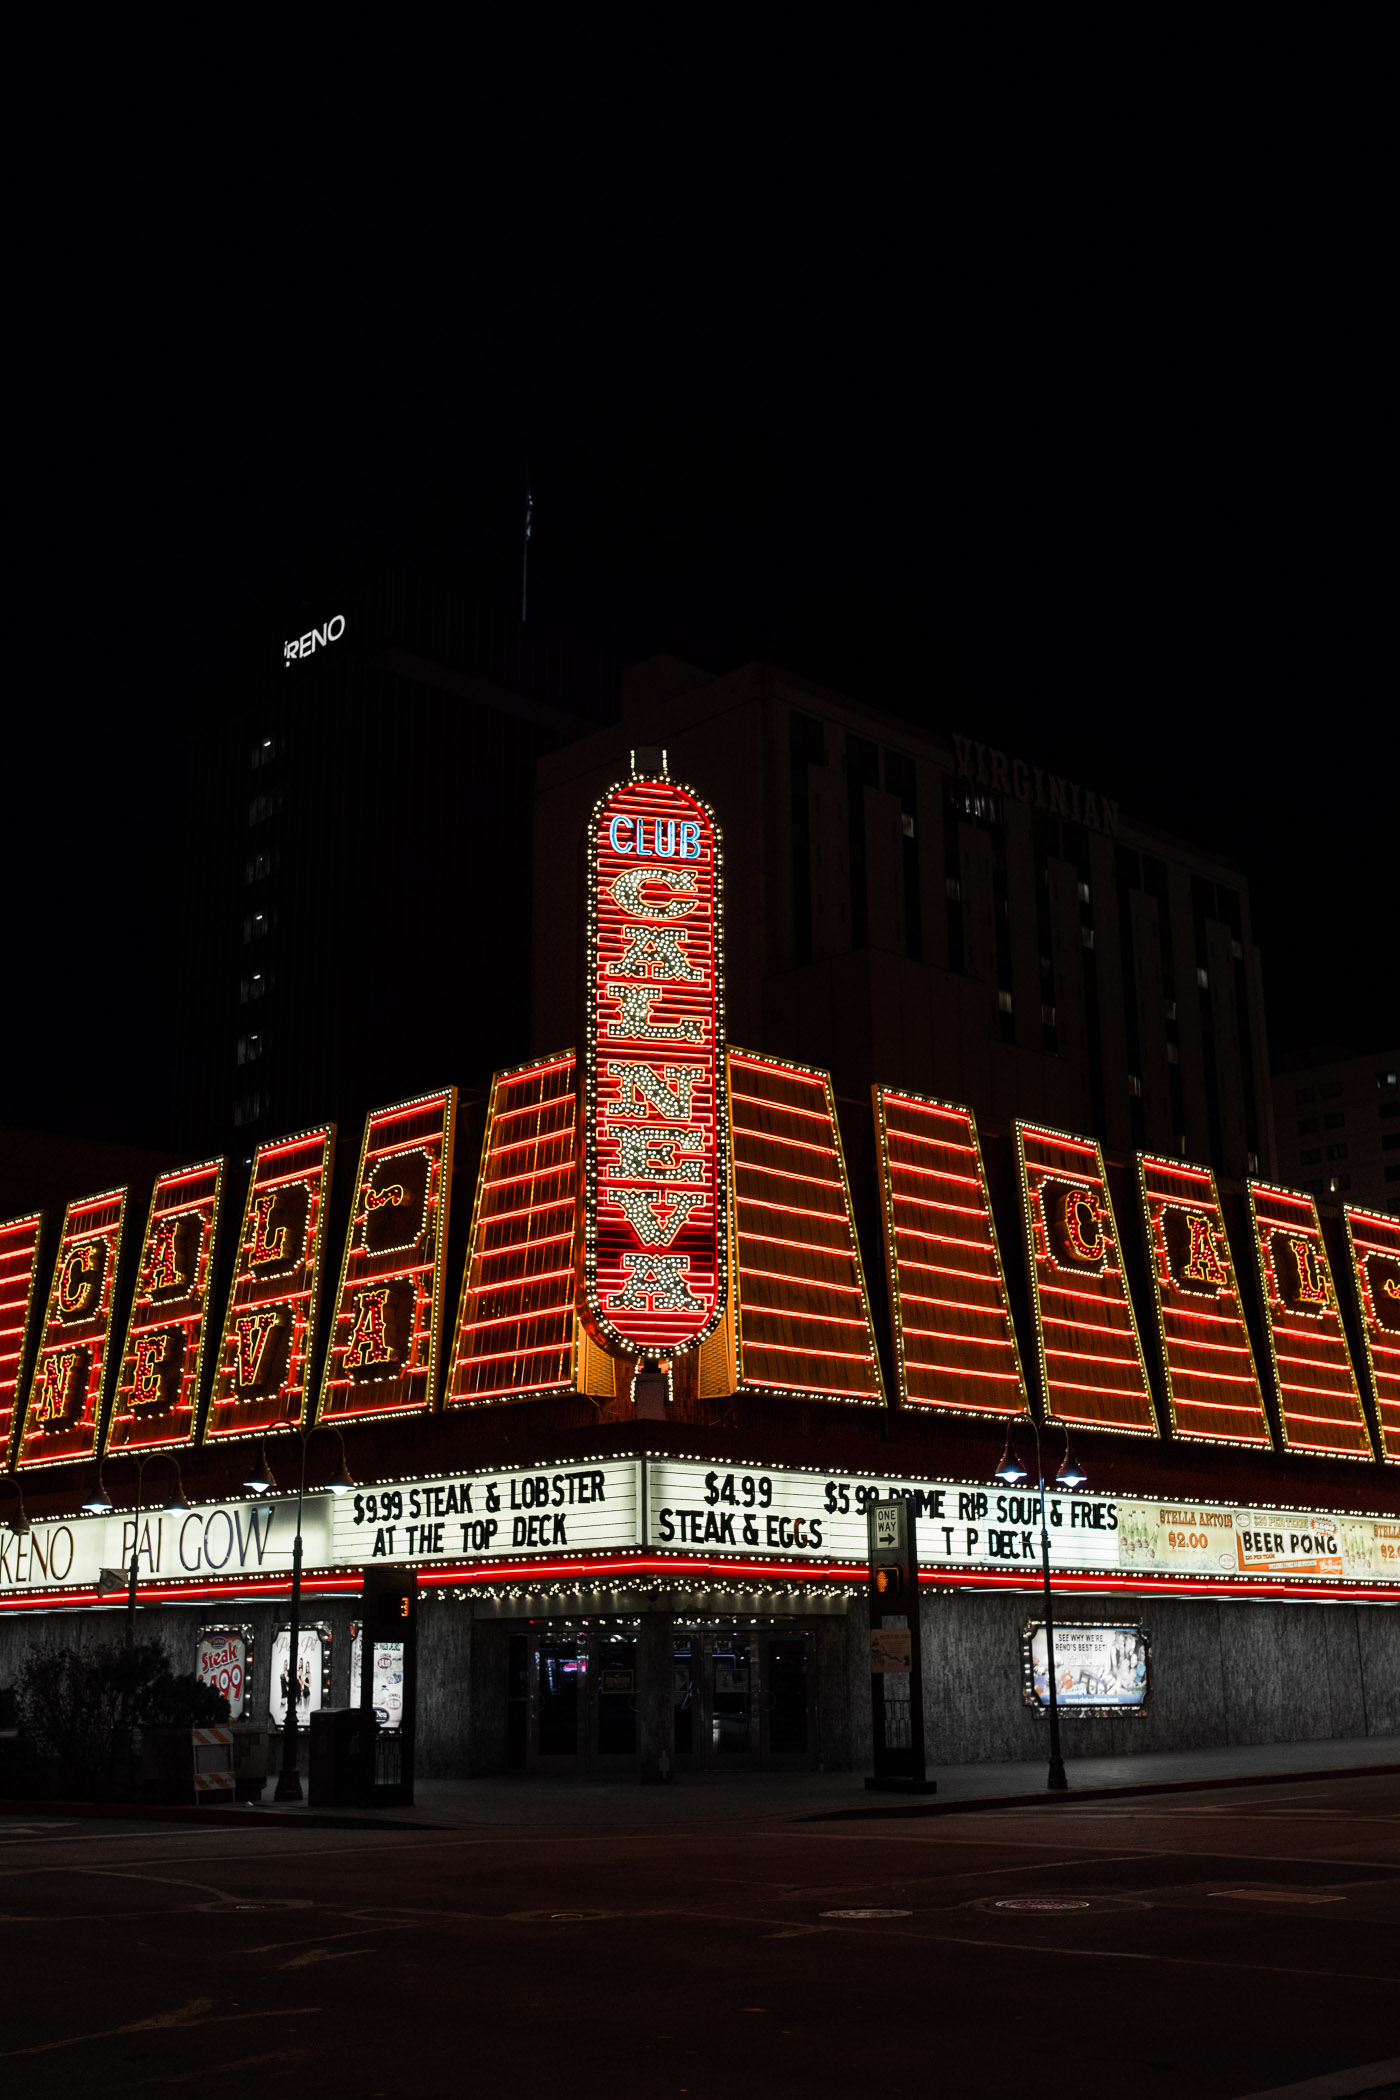 48 Hours in Reno, a quick trip city guide